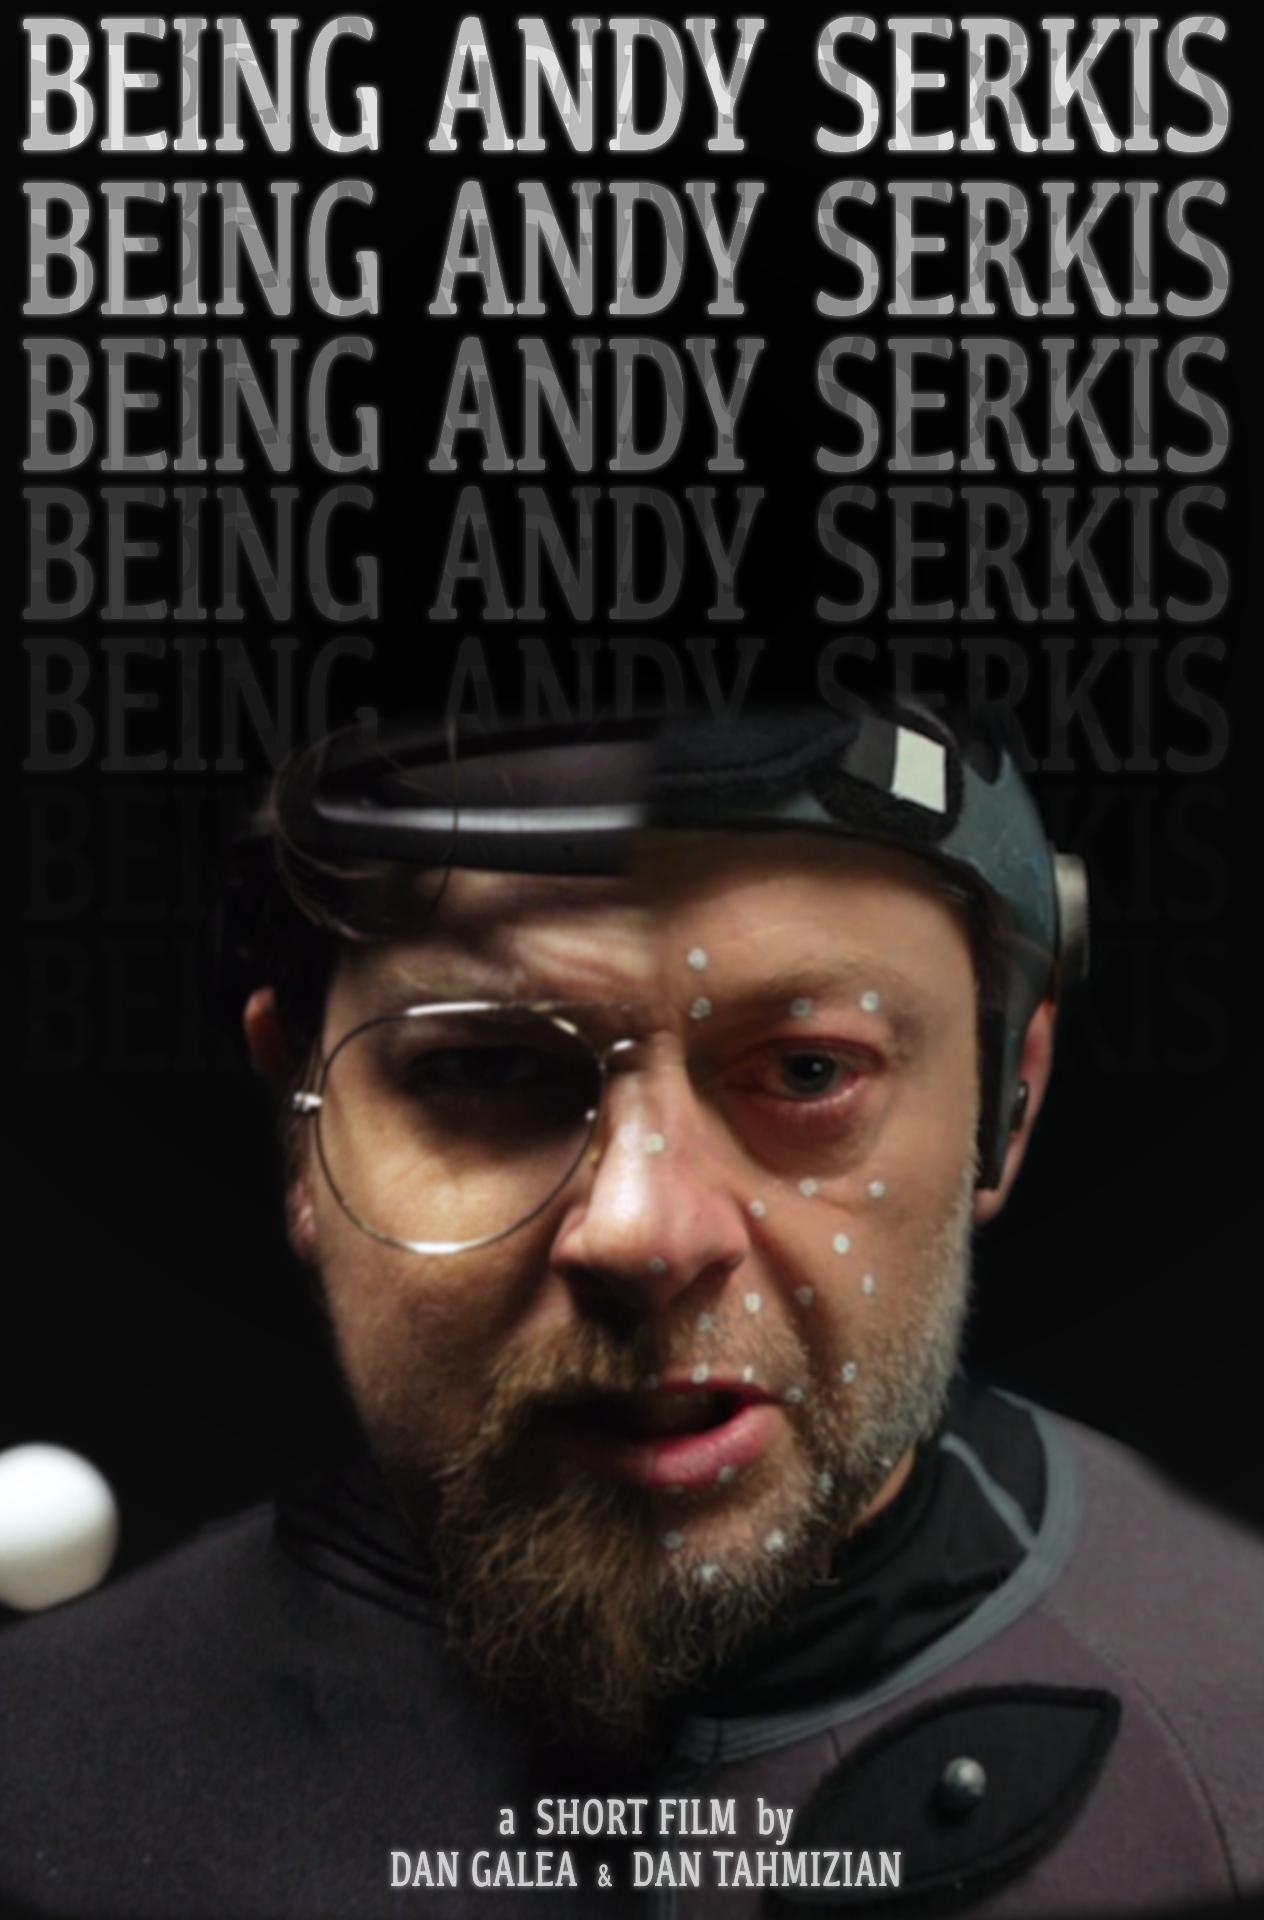 Being Andy Serkis